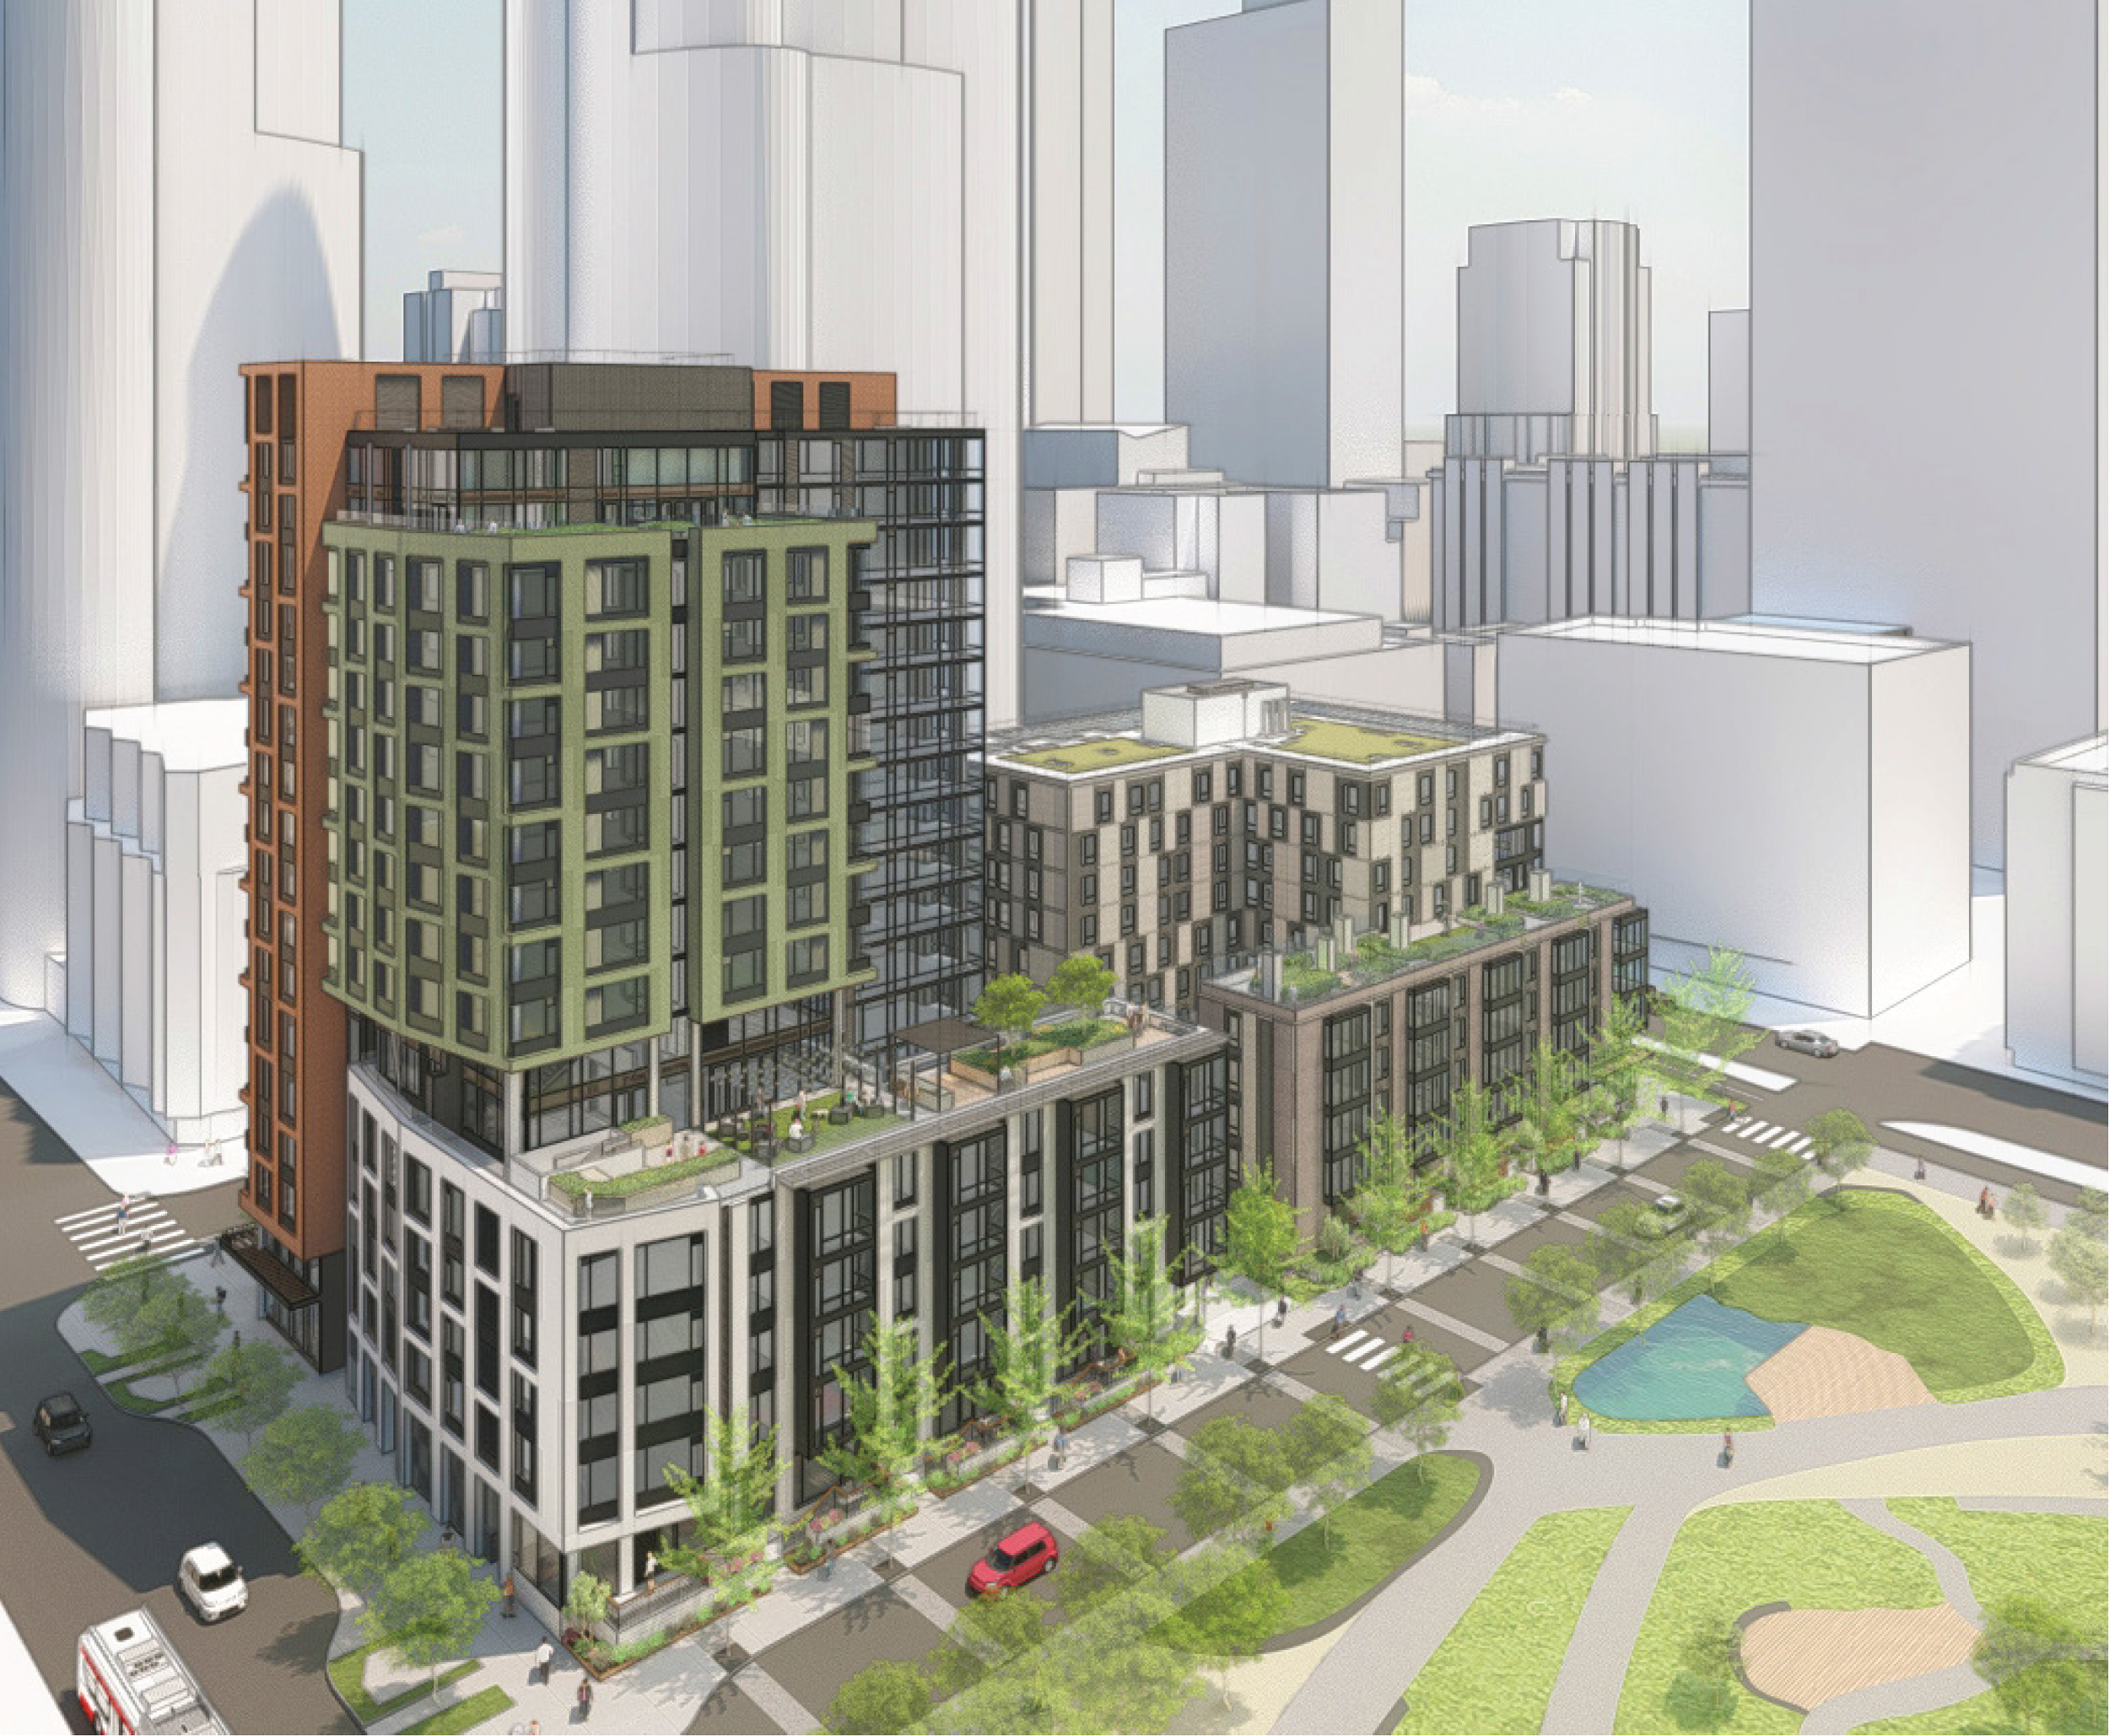 Transbay Block 2 East aerial view over the proposed park, rendering by Kennerly Architecture & Planning